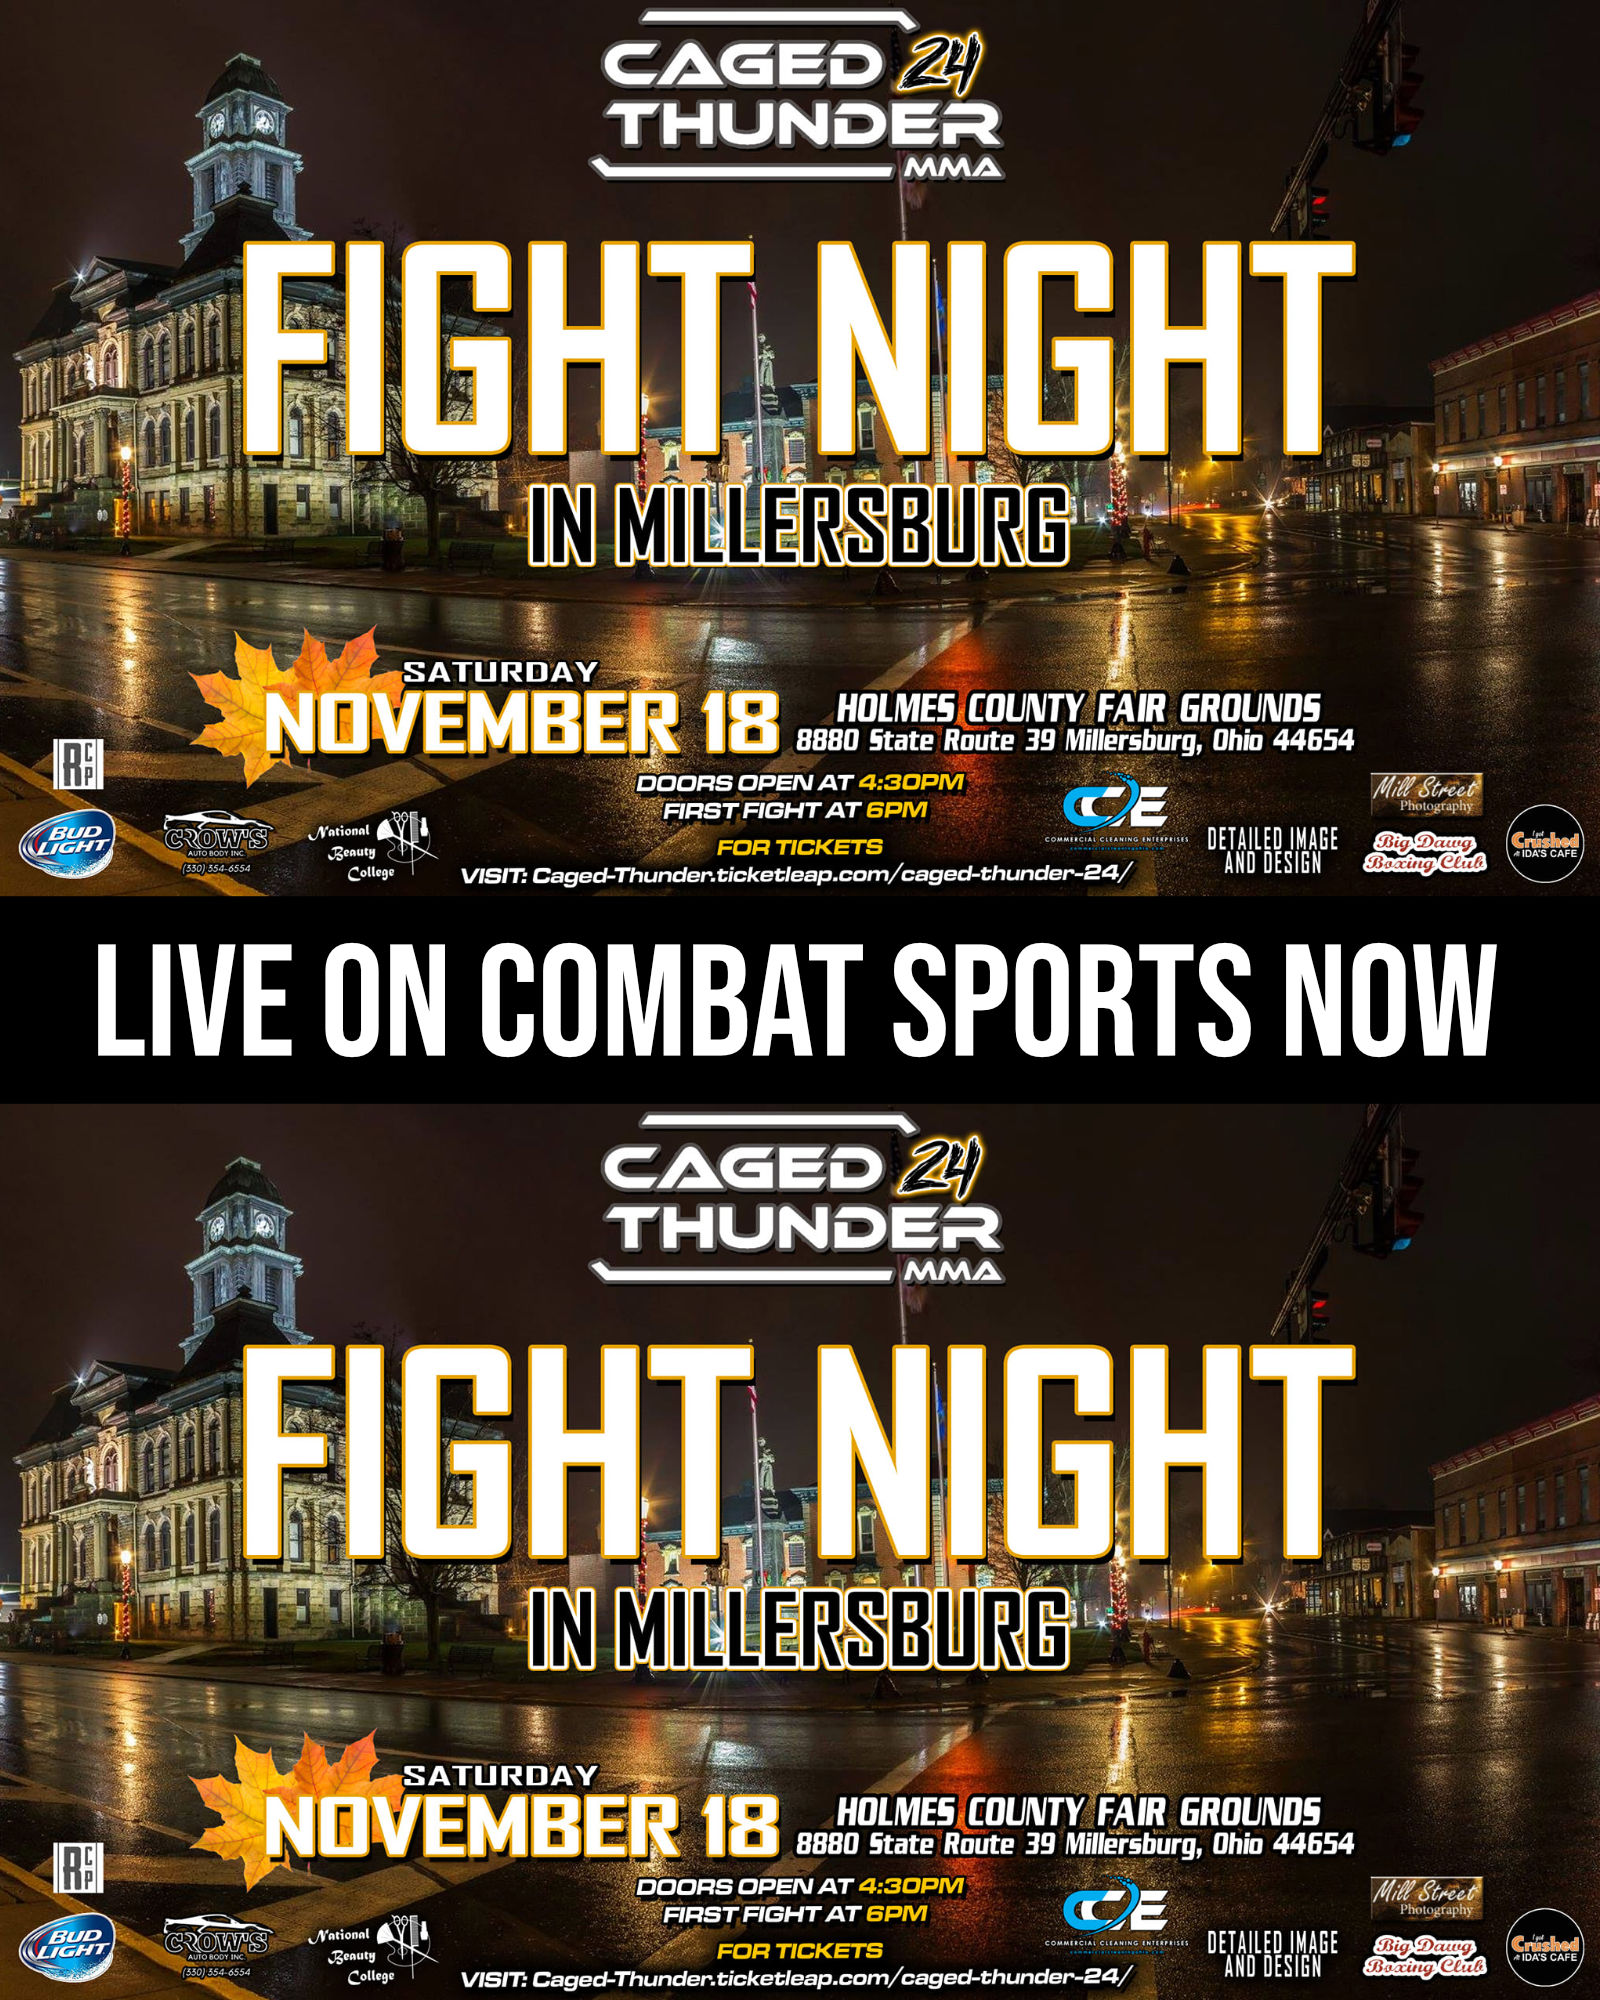 Caged Thunder 24 Fight Night in Millersburg Live on Combat Sports Now